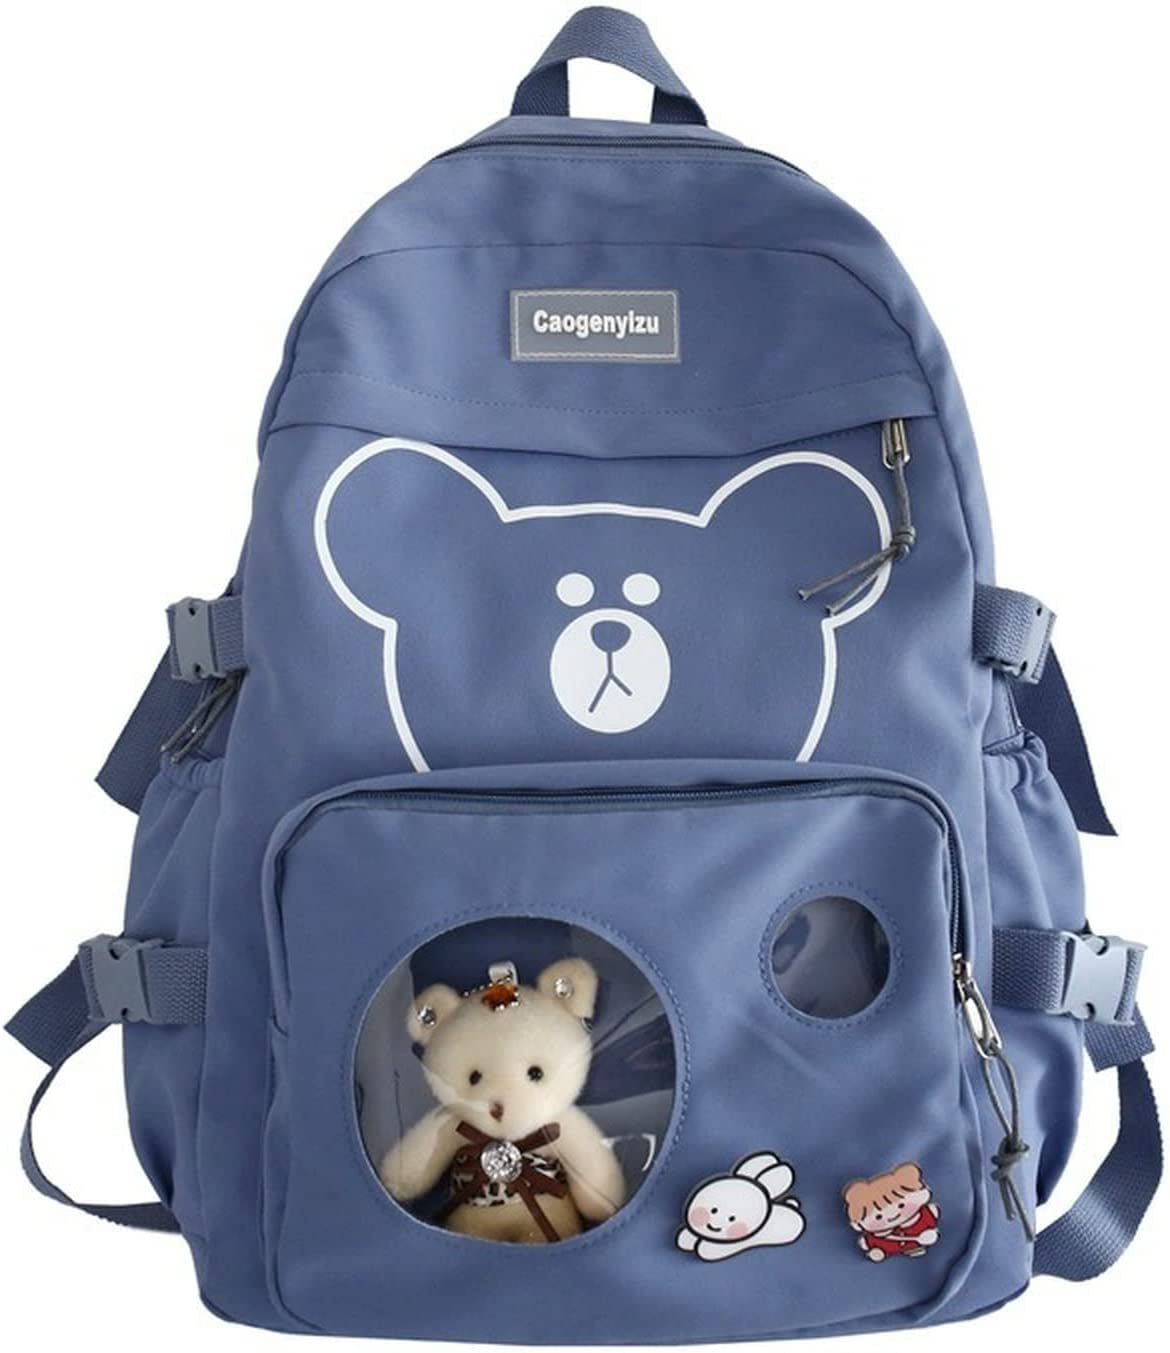 Kawaii Preppy Bear Backpack with Pins - Student Cute Back To School ...